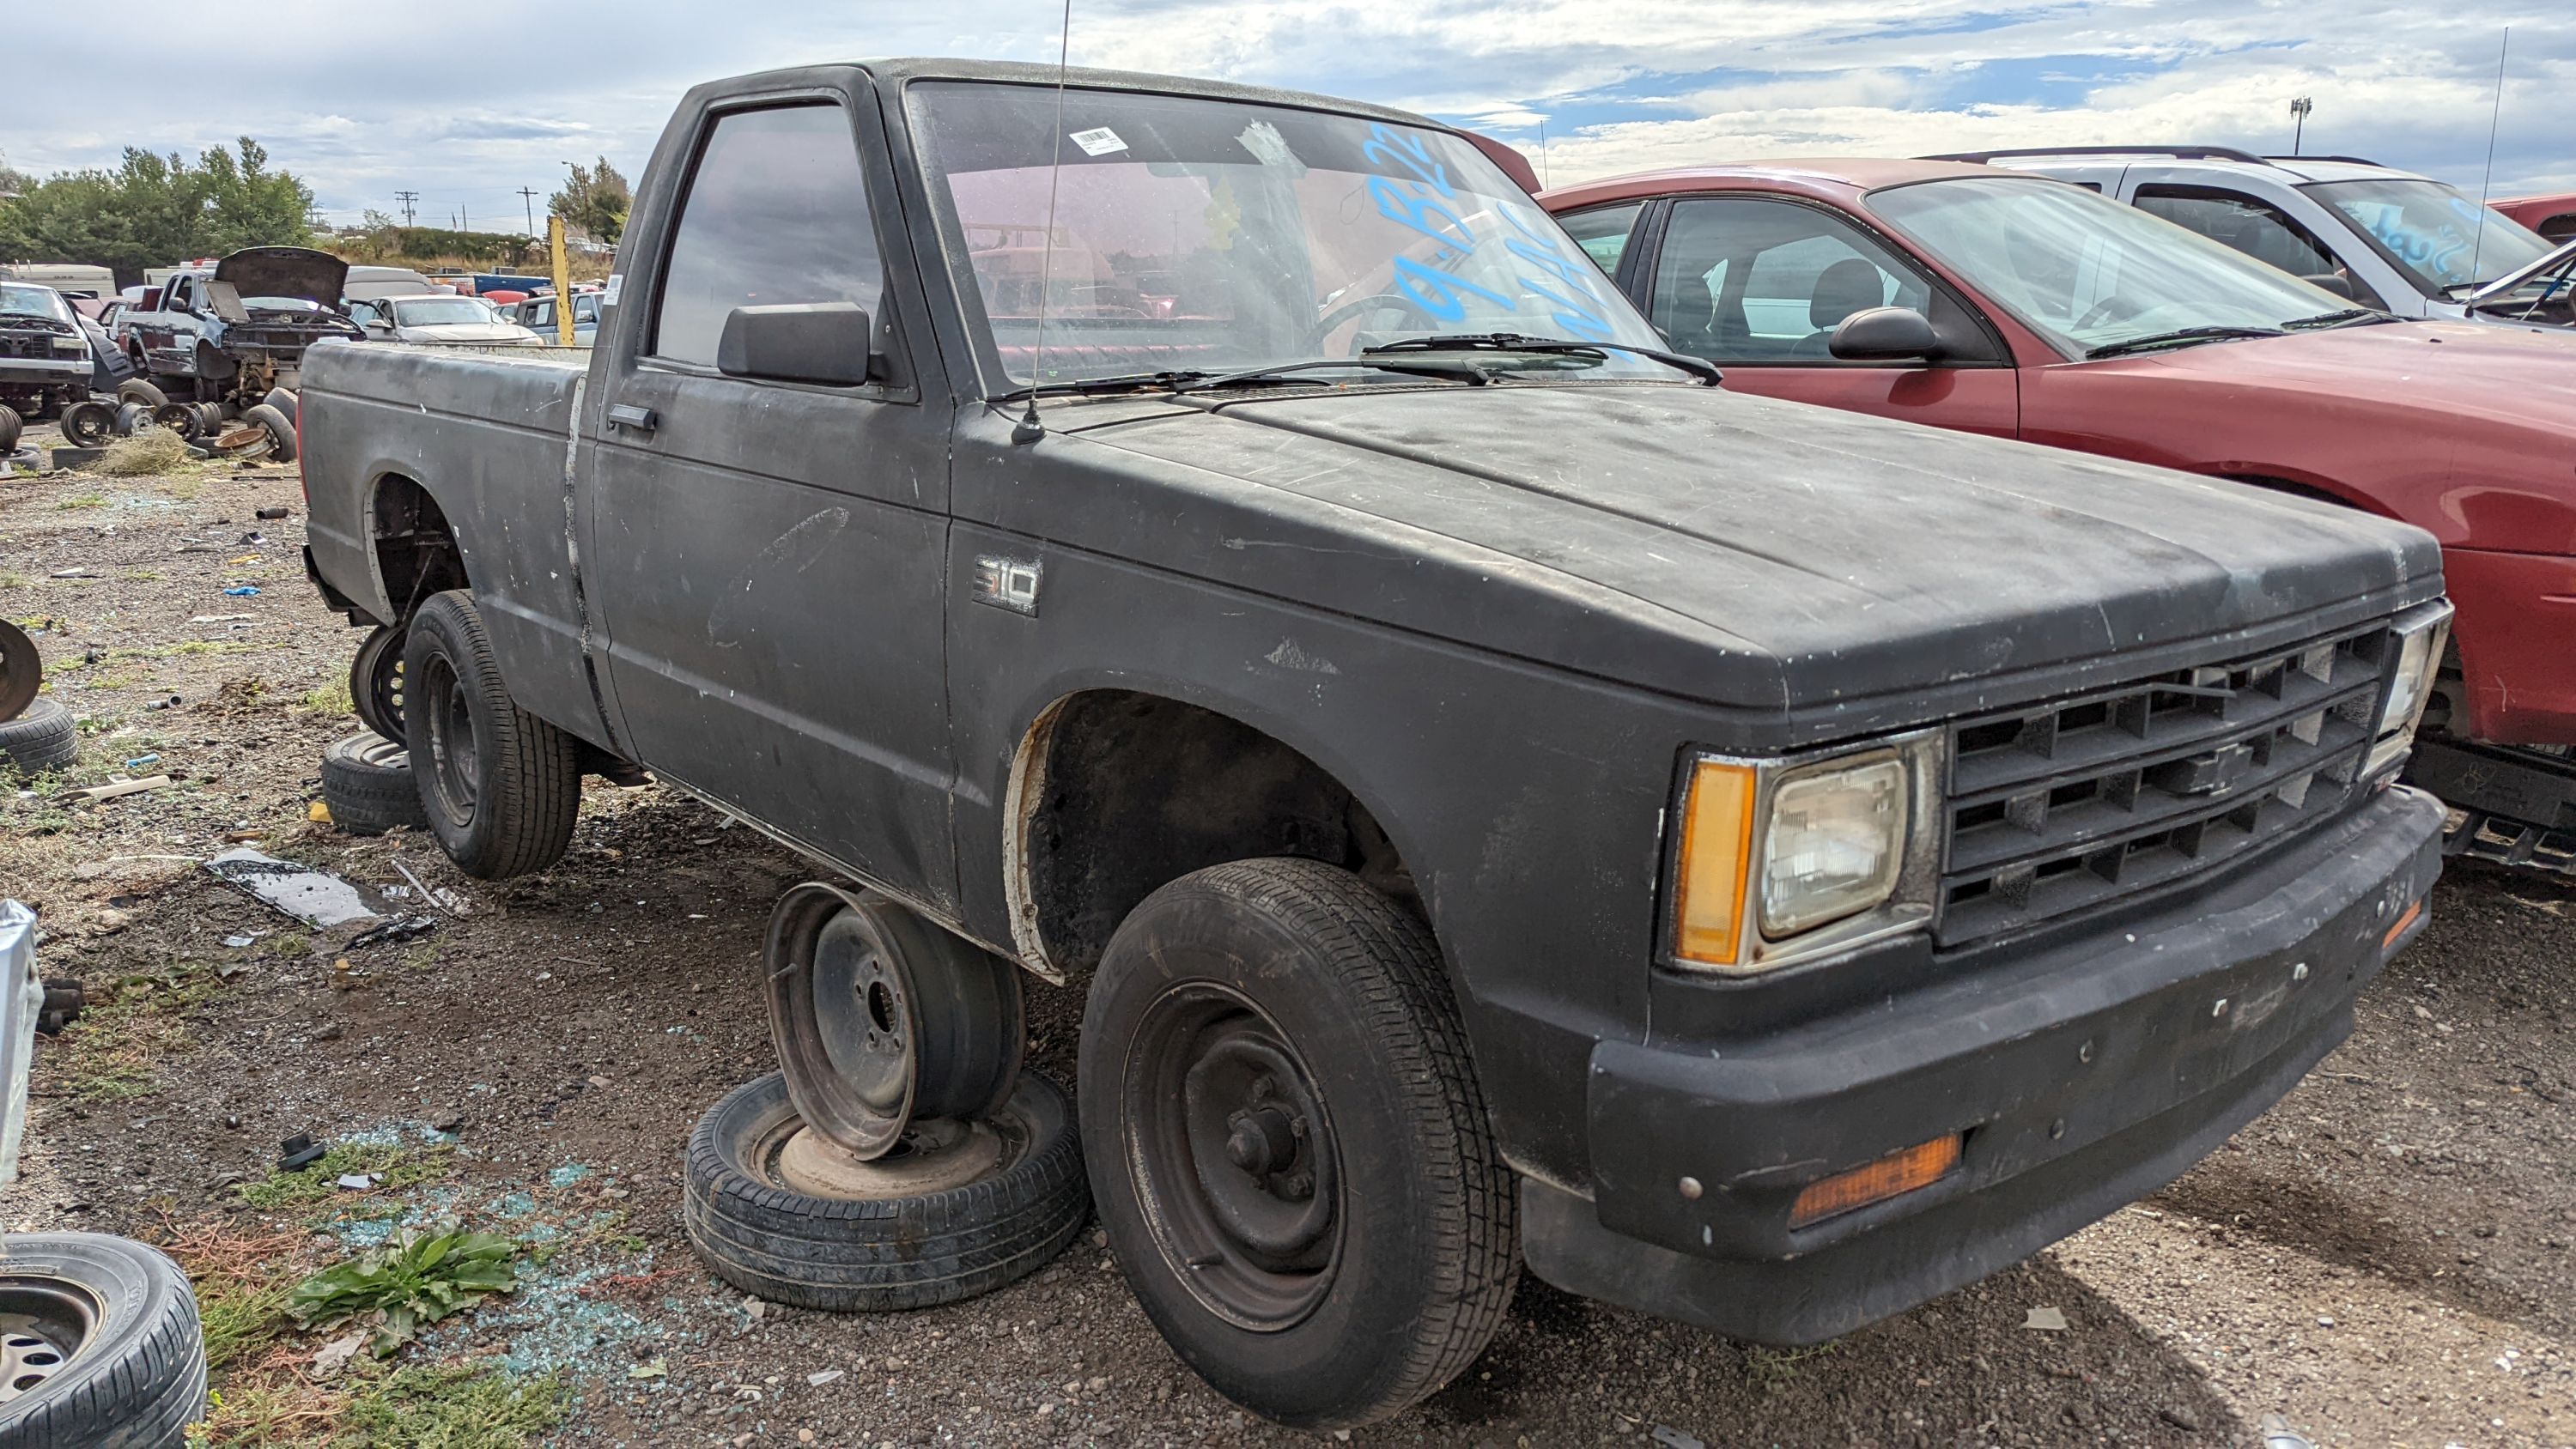 Chevrolet S-10 Truck: Models, Generations and Details | Autoblog